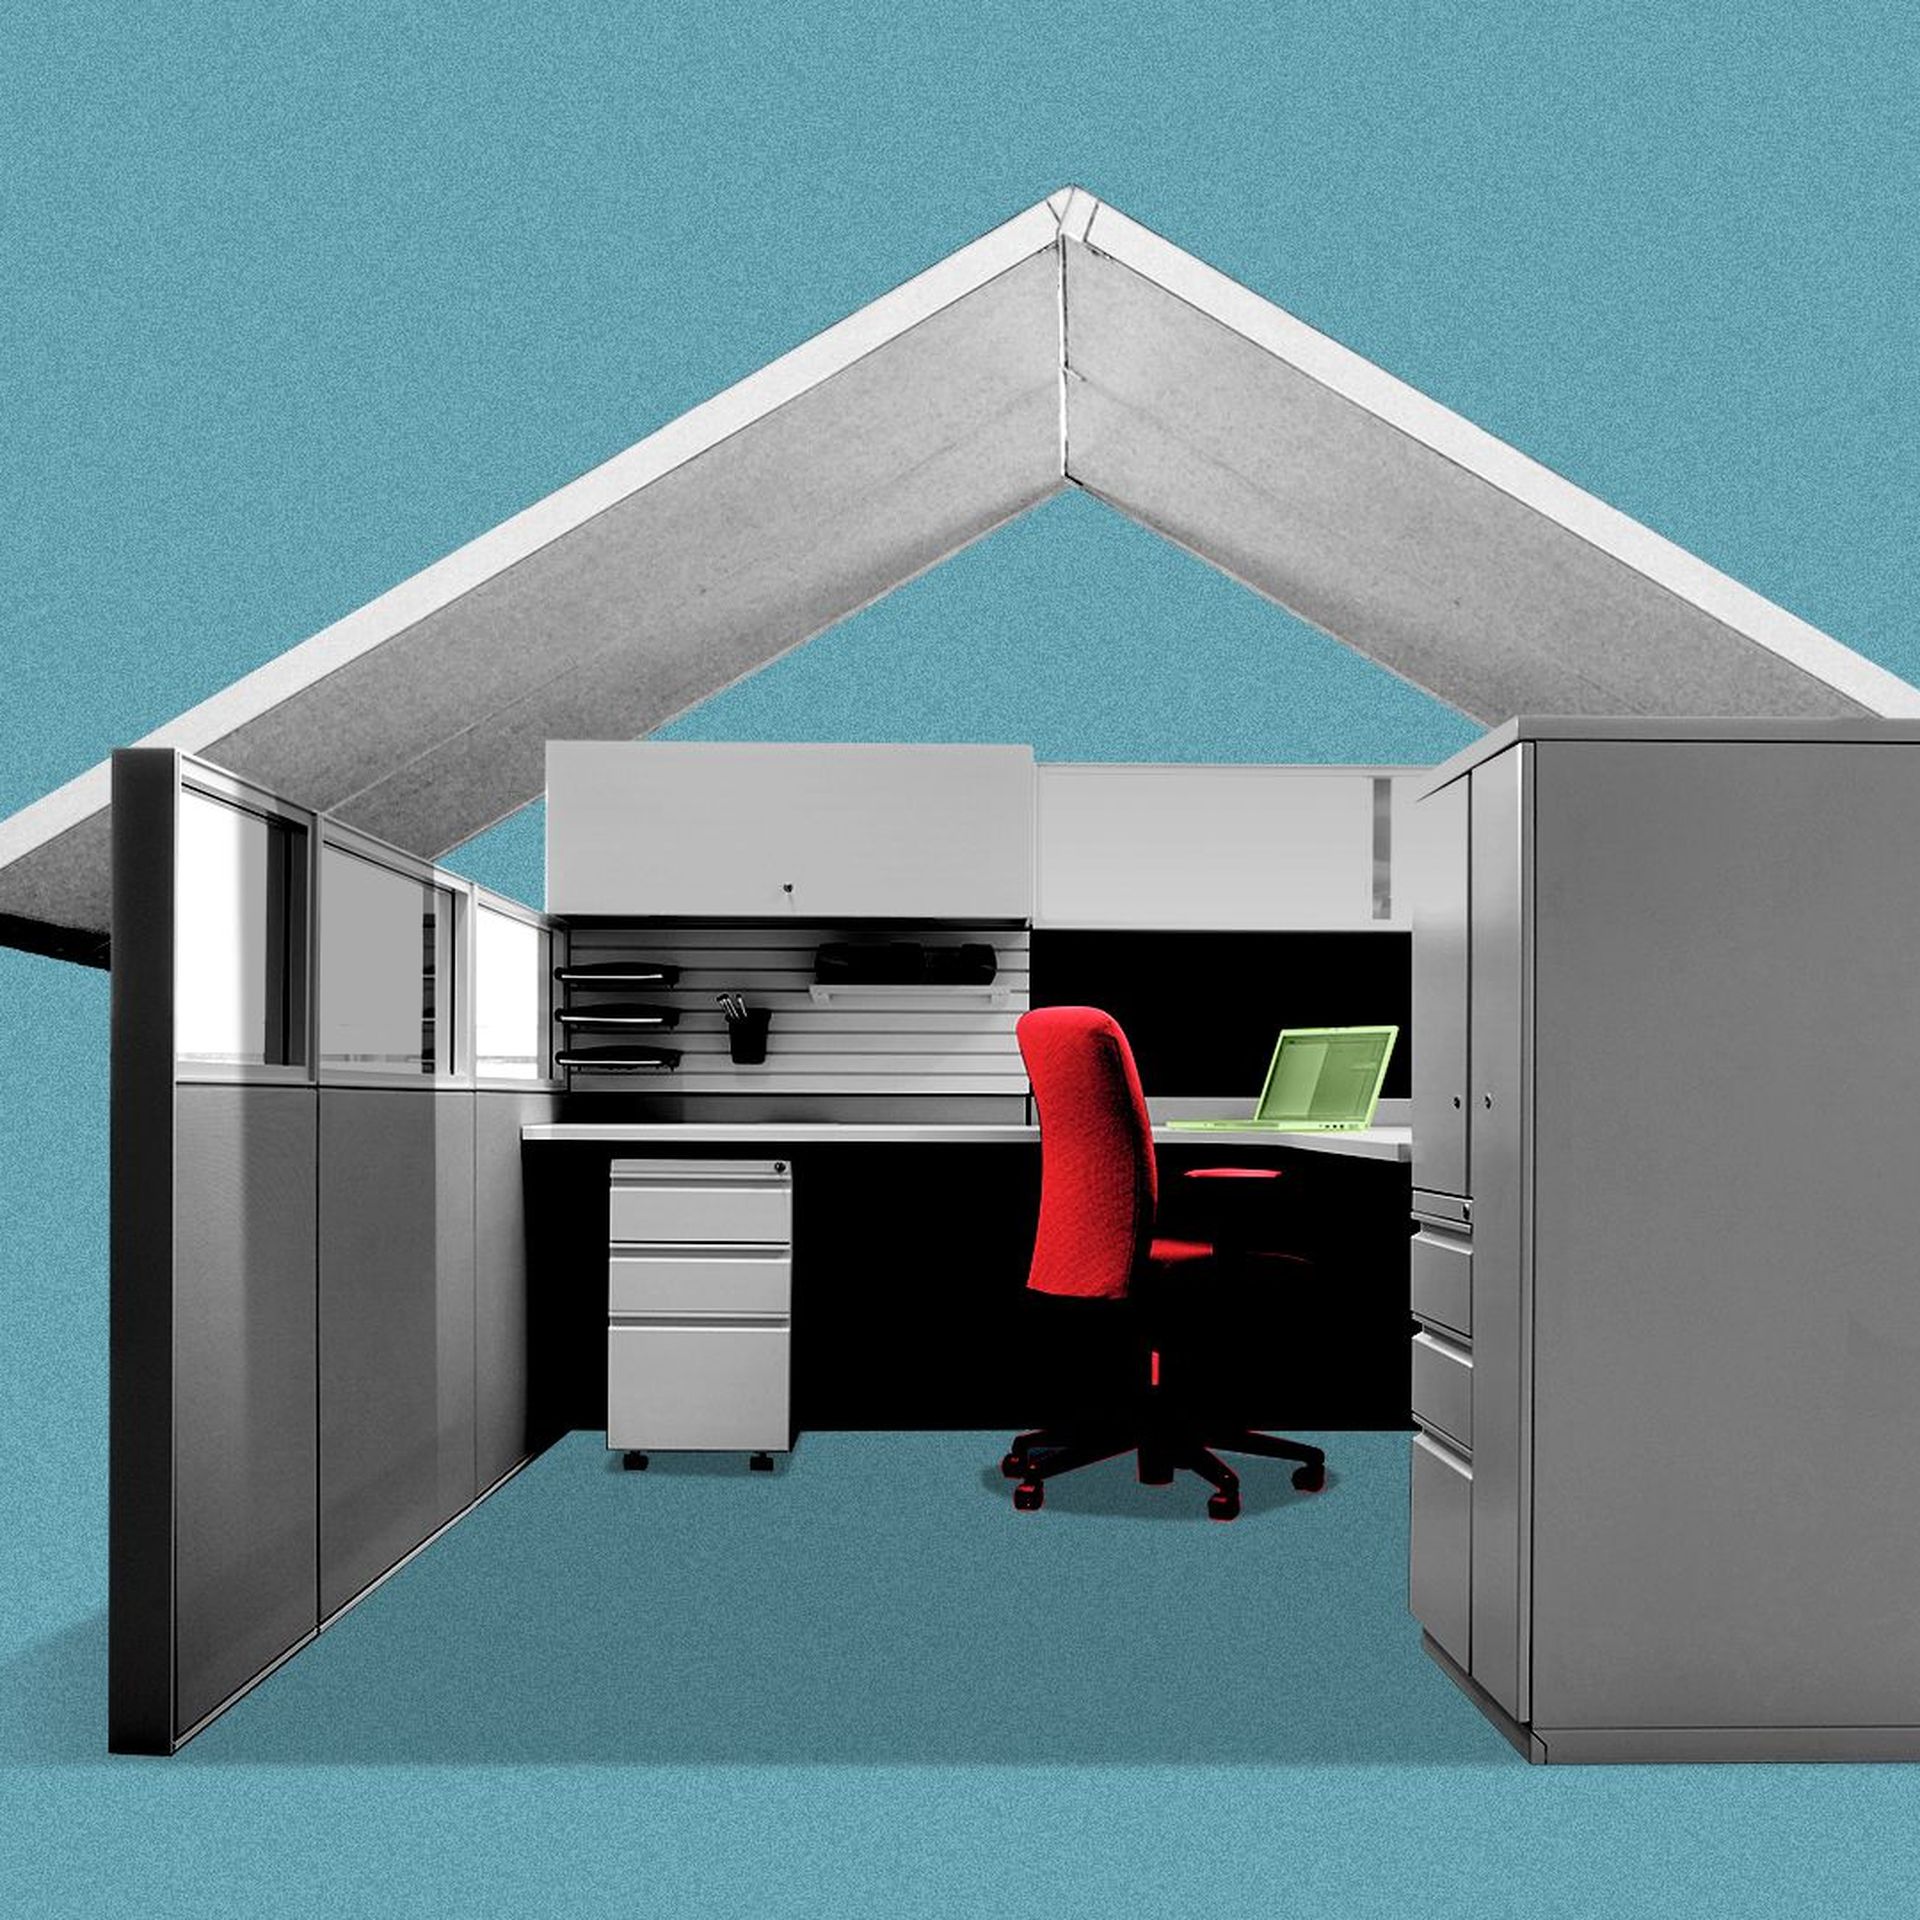 Illustration of an office cubicle with a roof like a house.